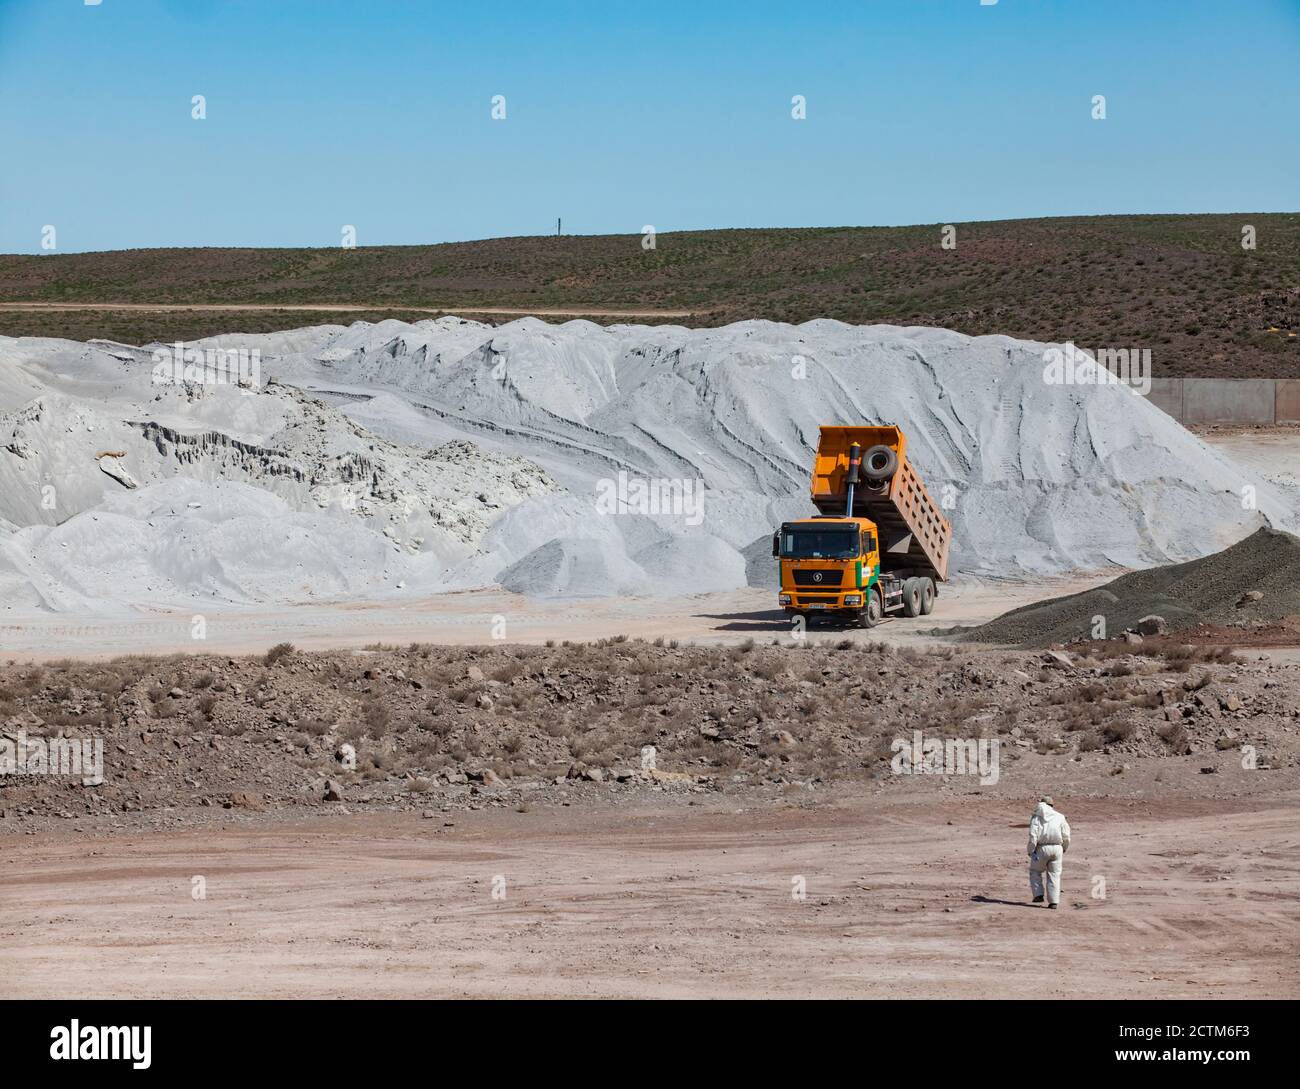 Jambyl Cement plant storage of raw materials. Heap of minerals (clinker) and dump truck and worker in white protective suit. Stock Photo